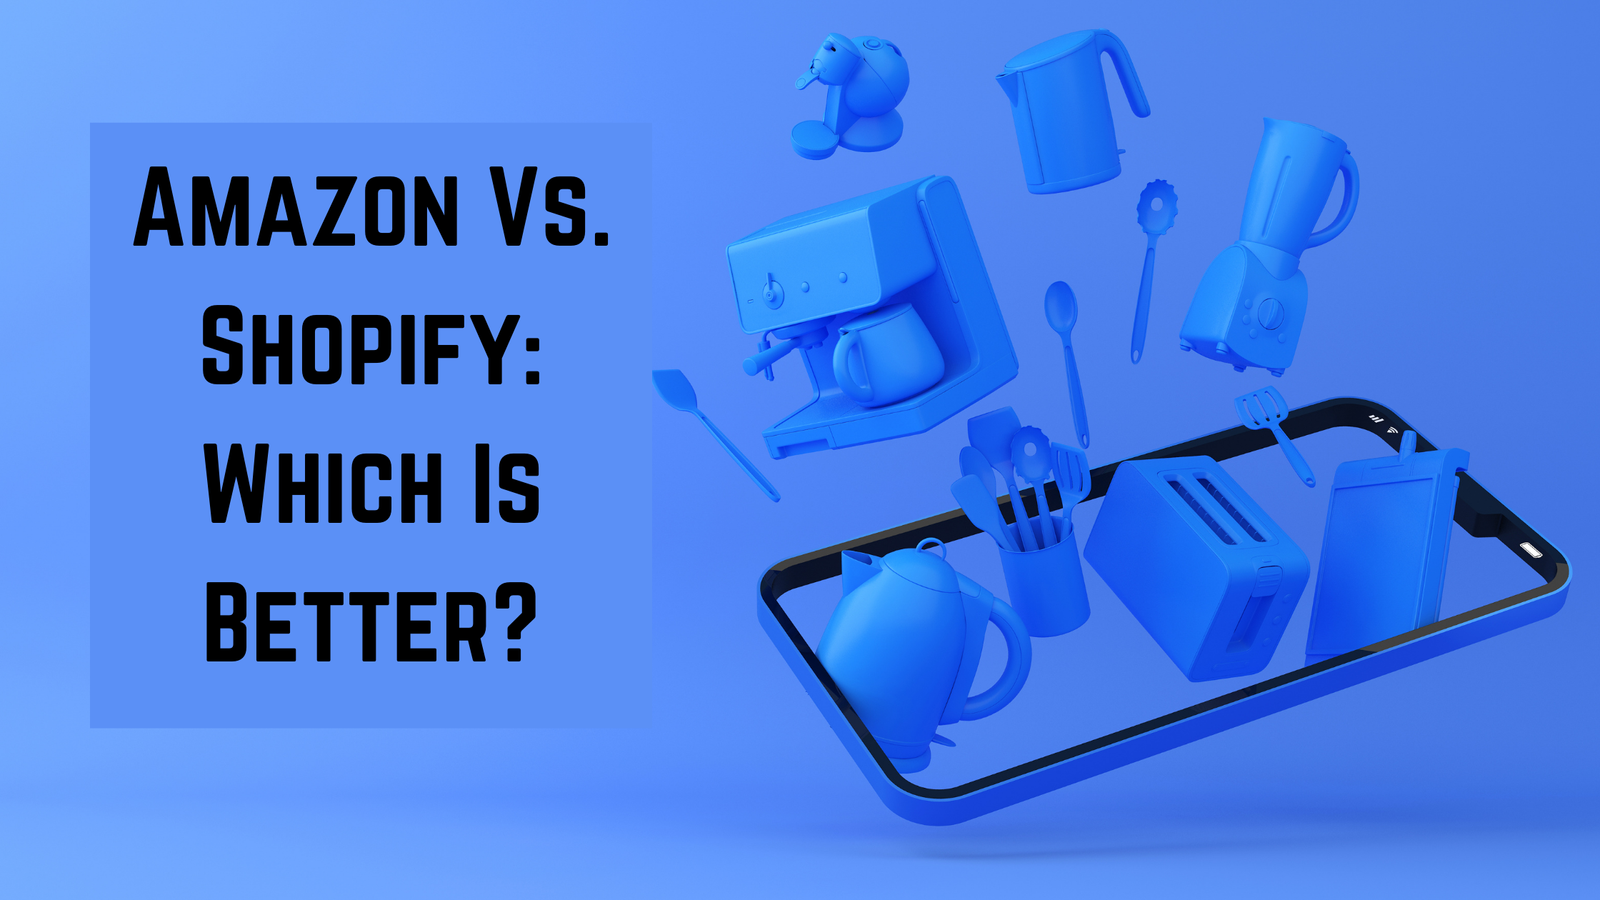 Amazon Vs Shopify: Which Is Better?